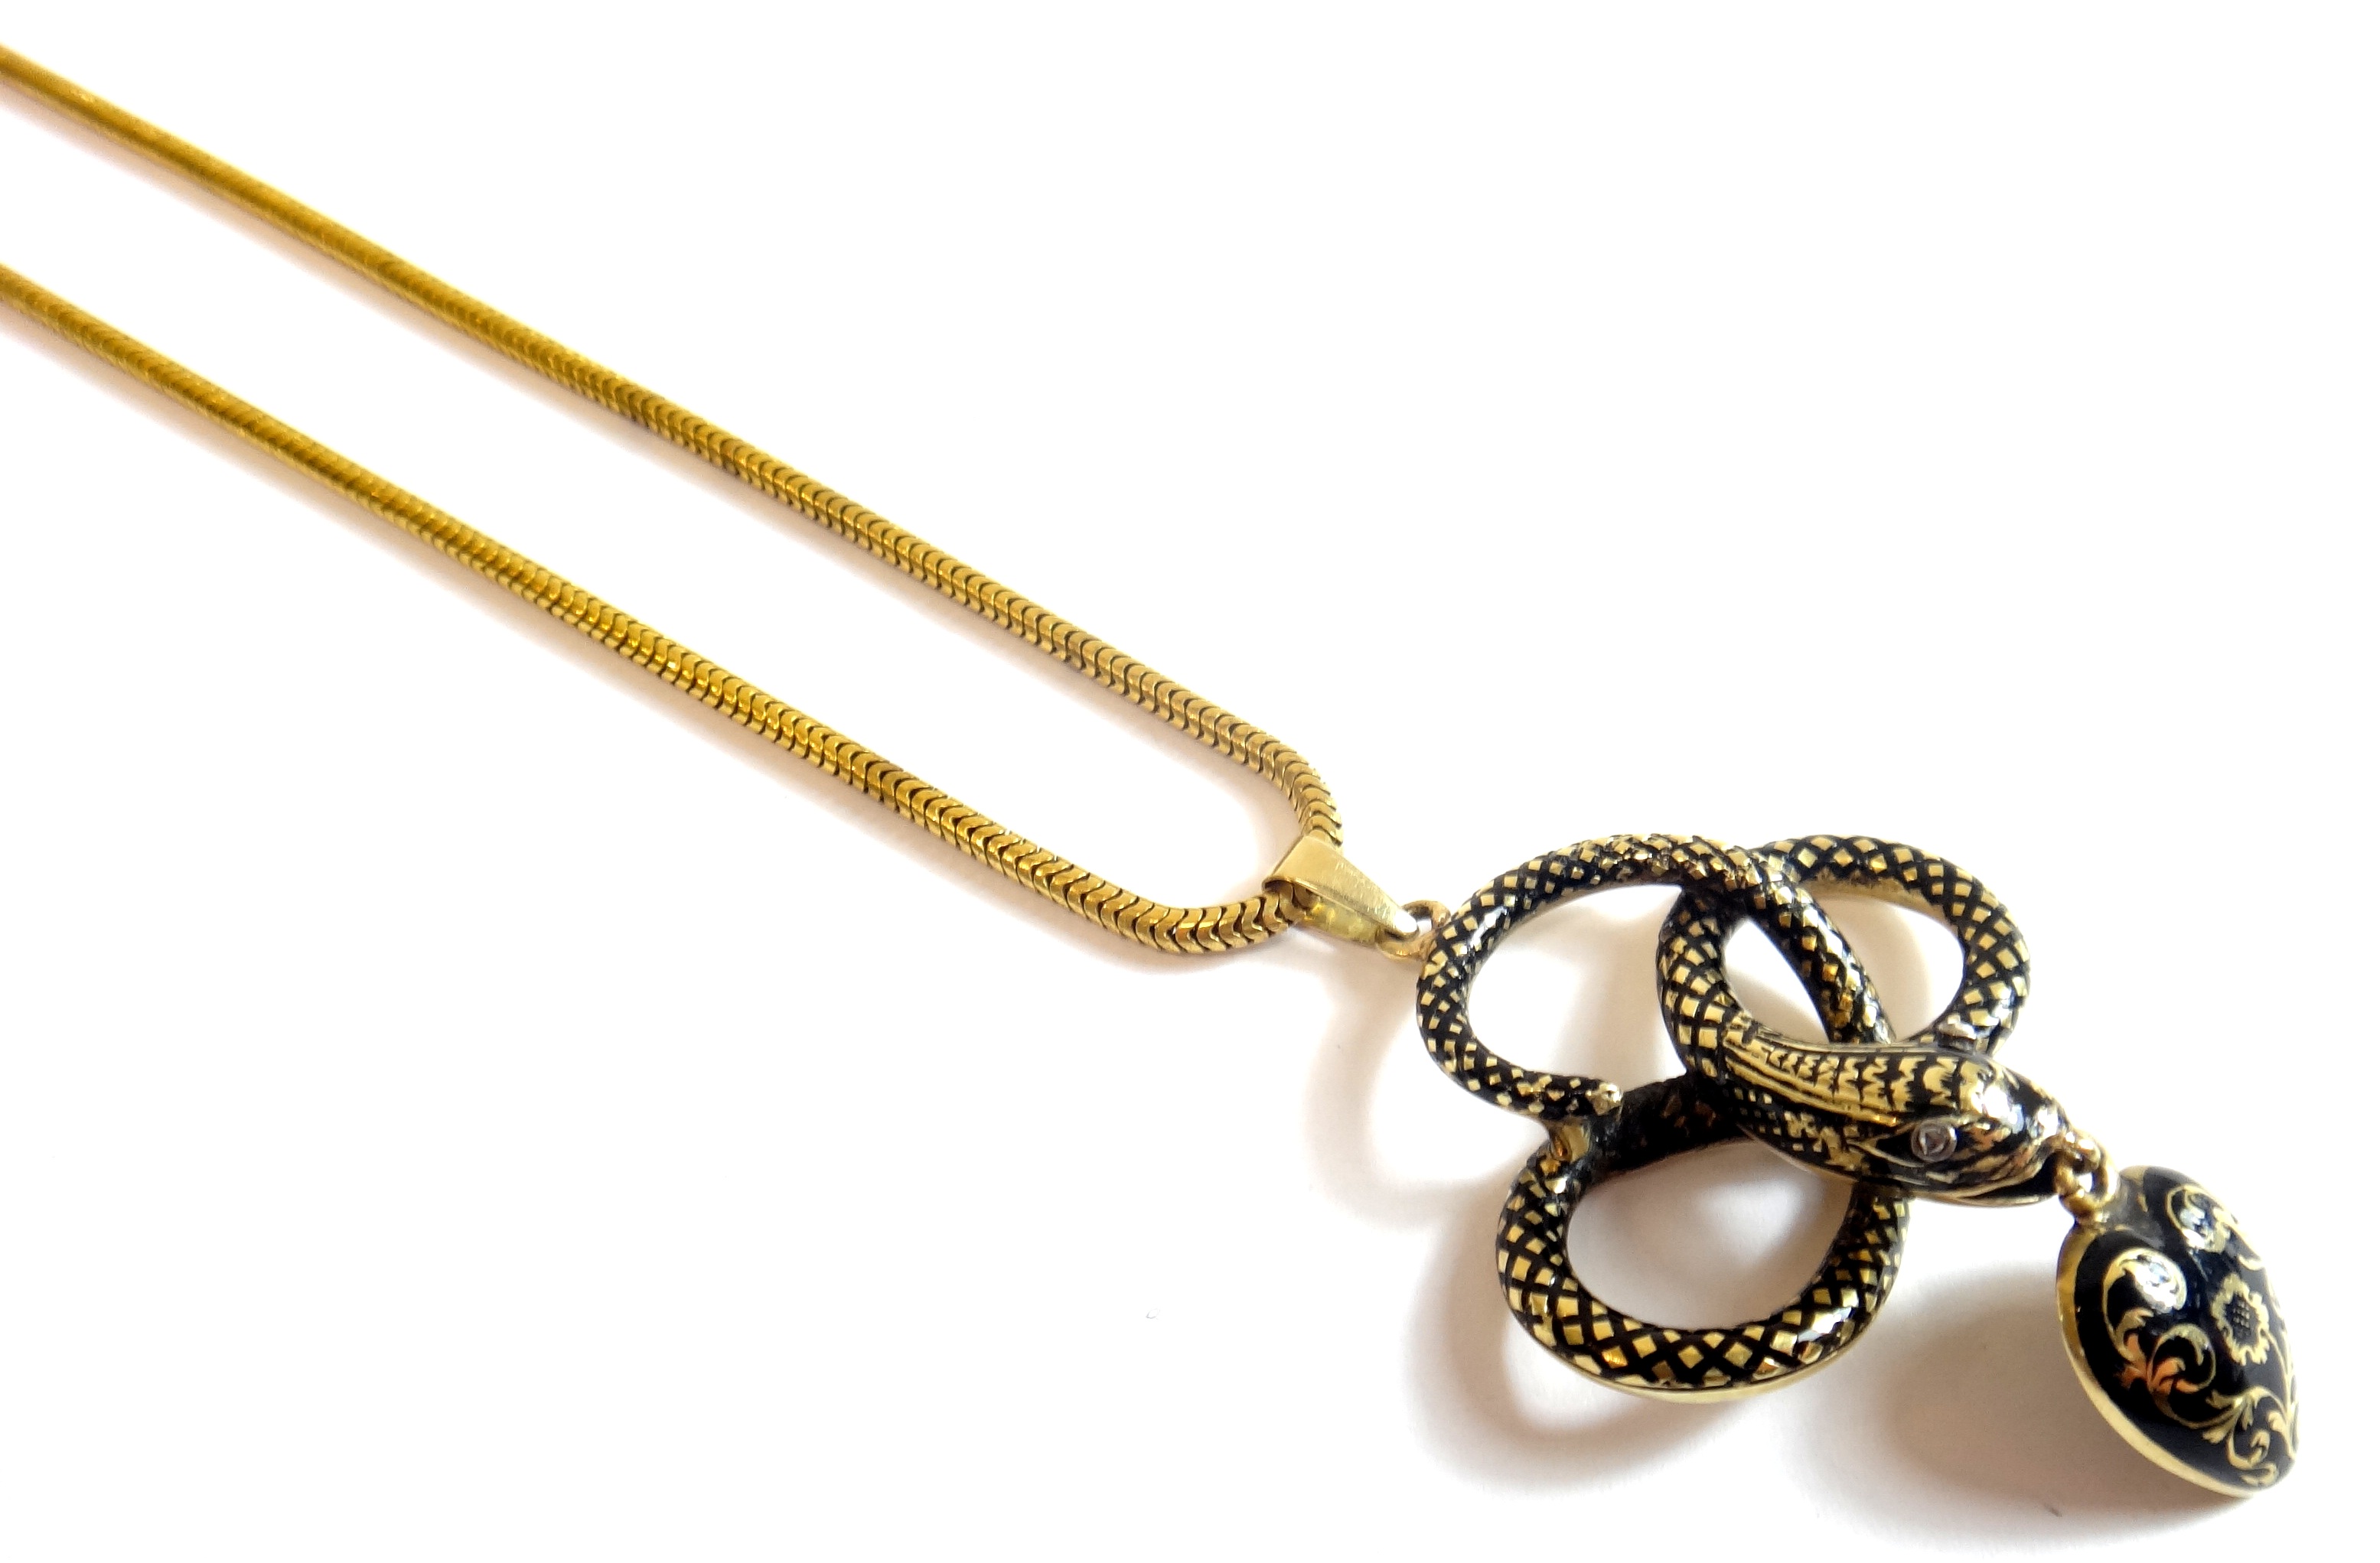 A Victorian gold and black enameled mourning pendant, designed as a coiled serpent, with rose